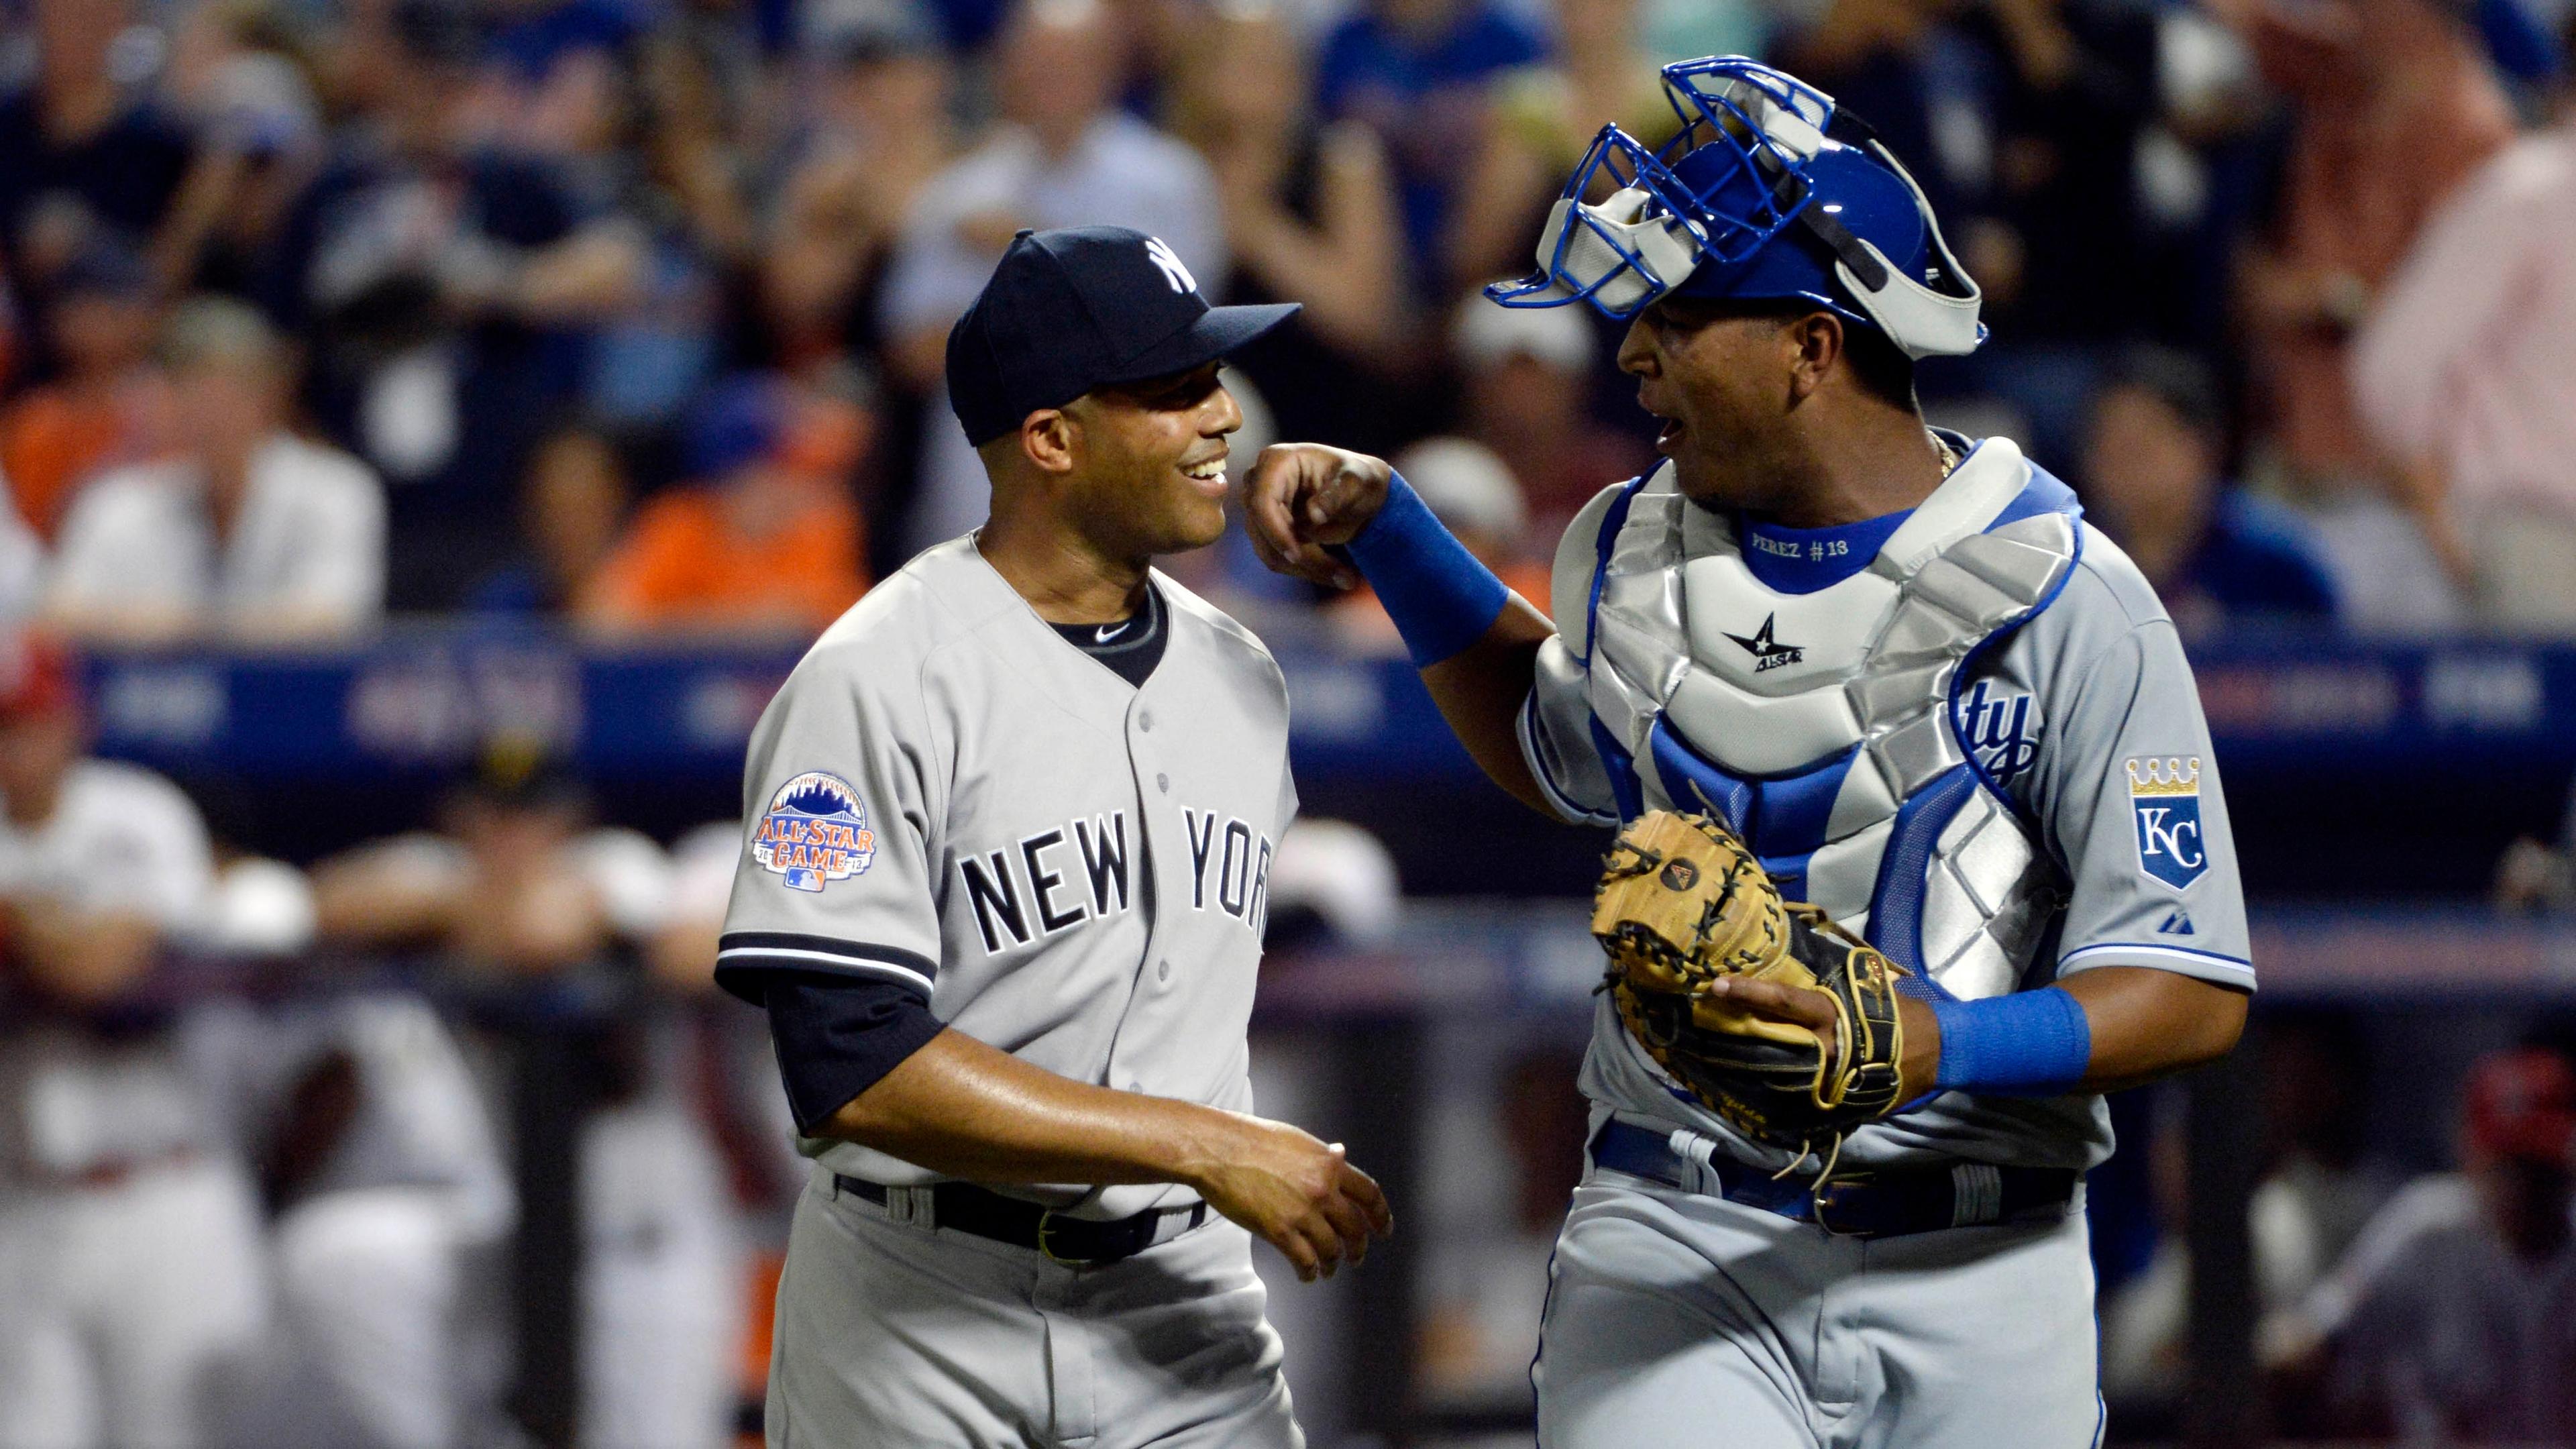 American League pitcher Mariano Rivera (42) of the New York Yankees walks off the field with catcher Salvador Perez (13) of the Kansas City Royals after retiring the National League in the 8th inning. / USA TODAY-USA TODAY Sports